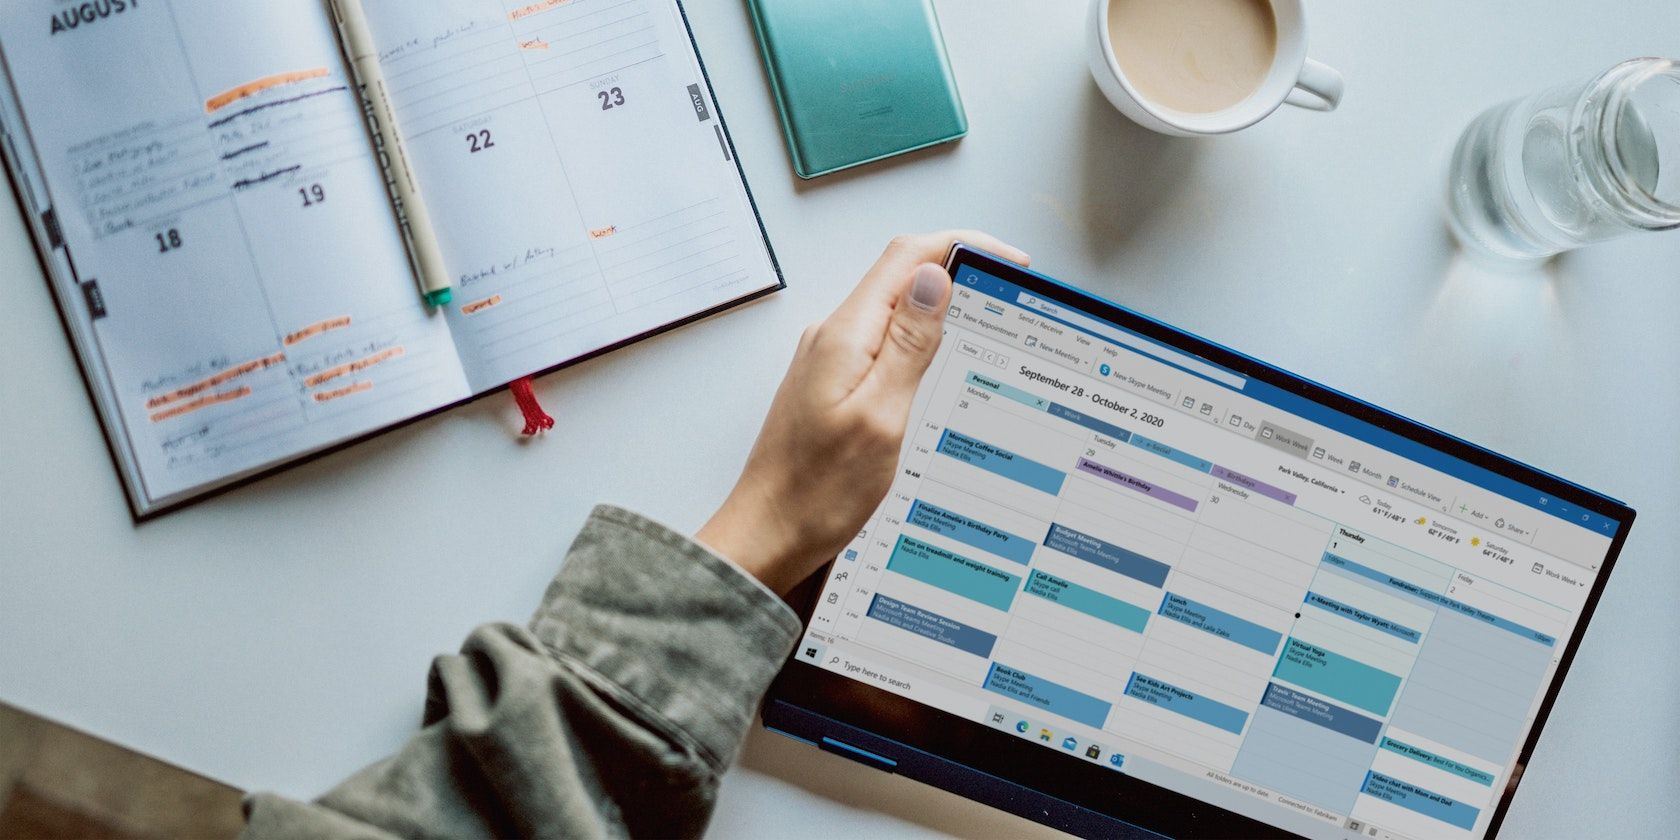 How to Schedule Meetings and Tasks Using Calendly